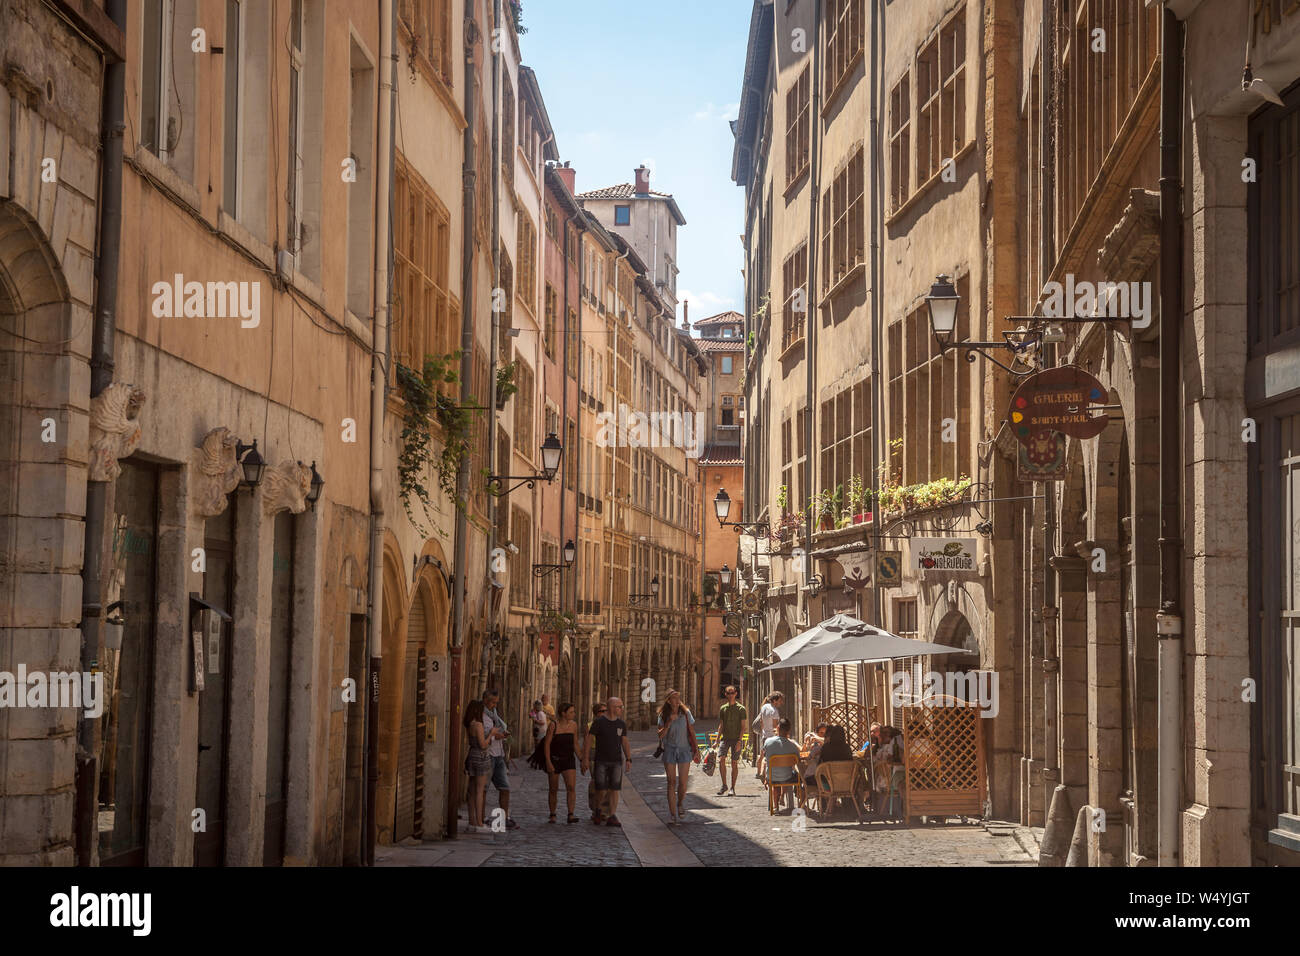 LYON, FRANCE - JULY 14, 2019: Typical narrow street of the Vieux Lyon (old Lyon) on the Presqu'ile district with tourists passing by during a sunny su Stock Photo